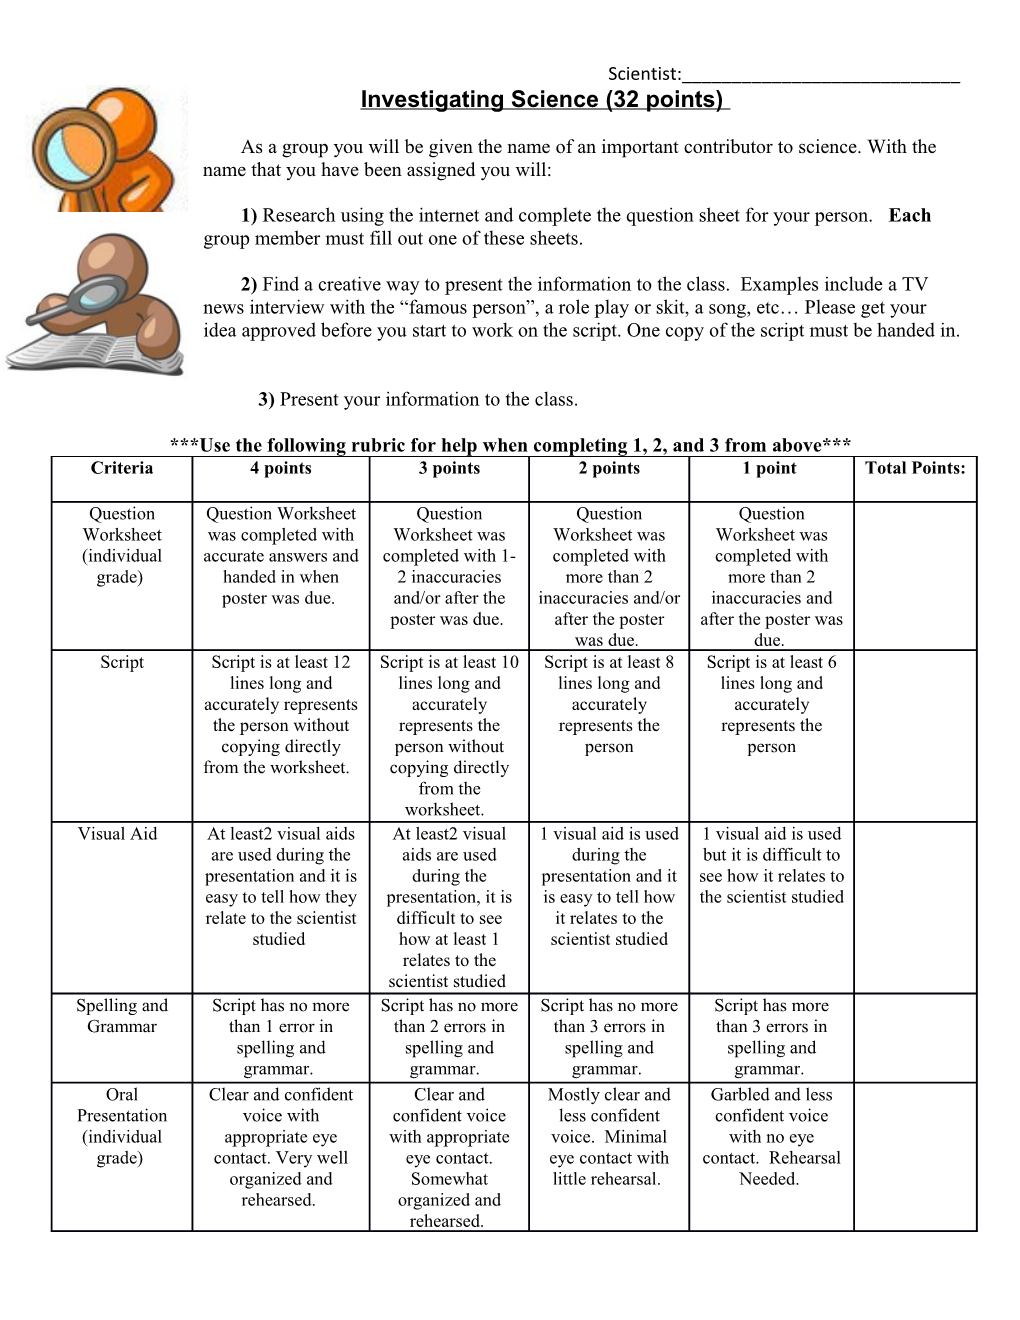 Use the Following Rubric for Help When Completing 1, 2, and 3 from Above